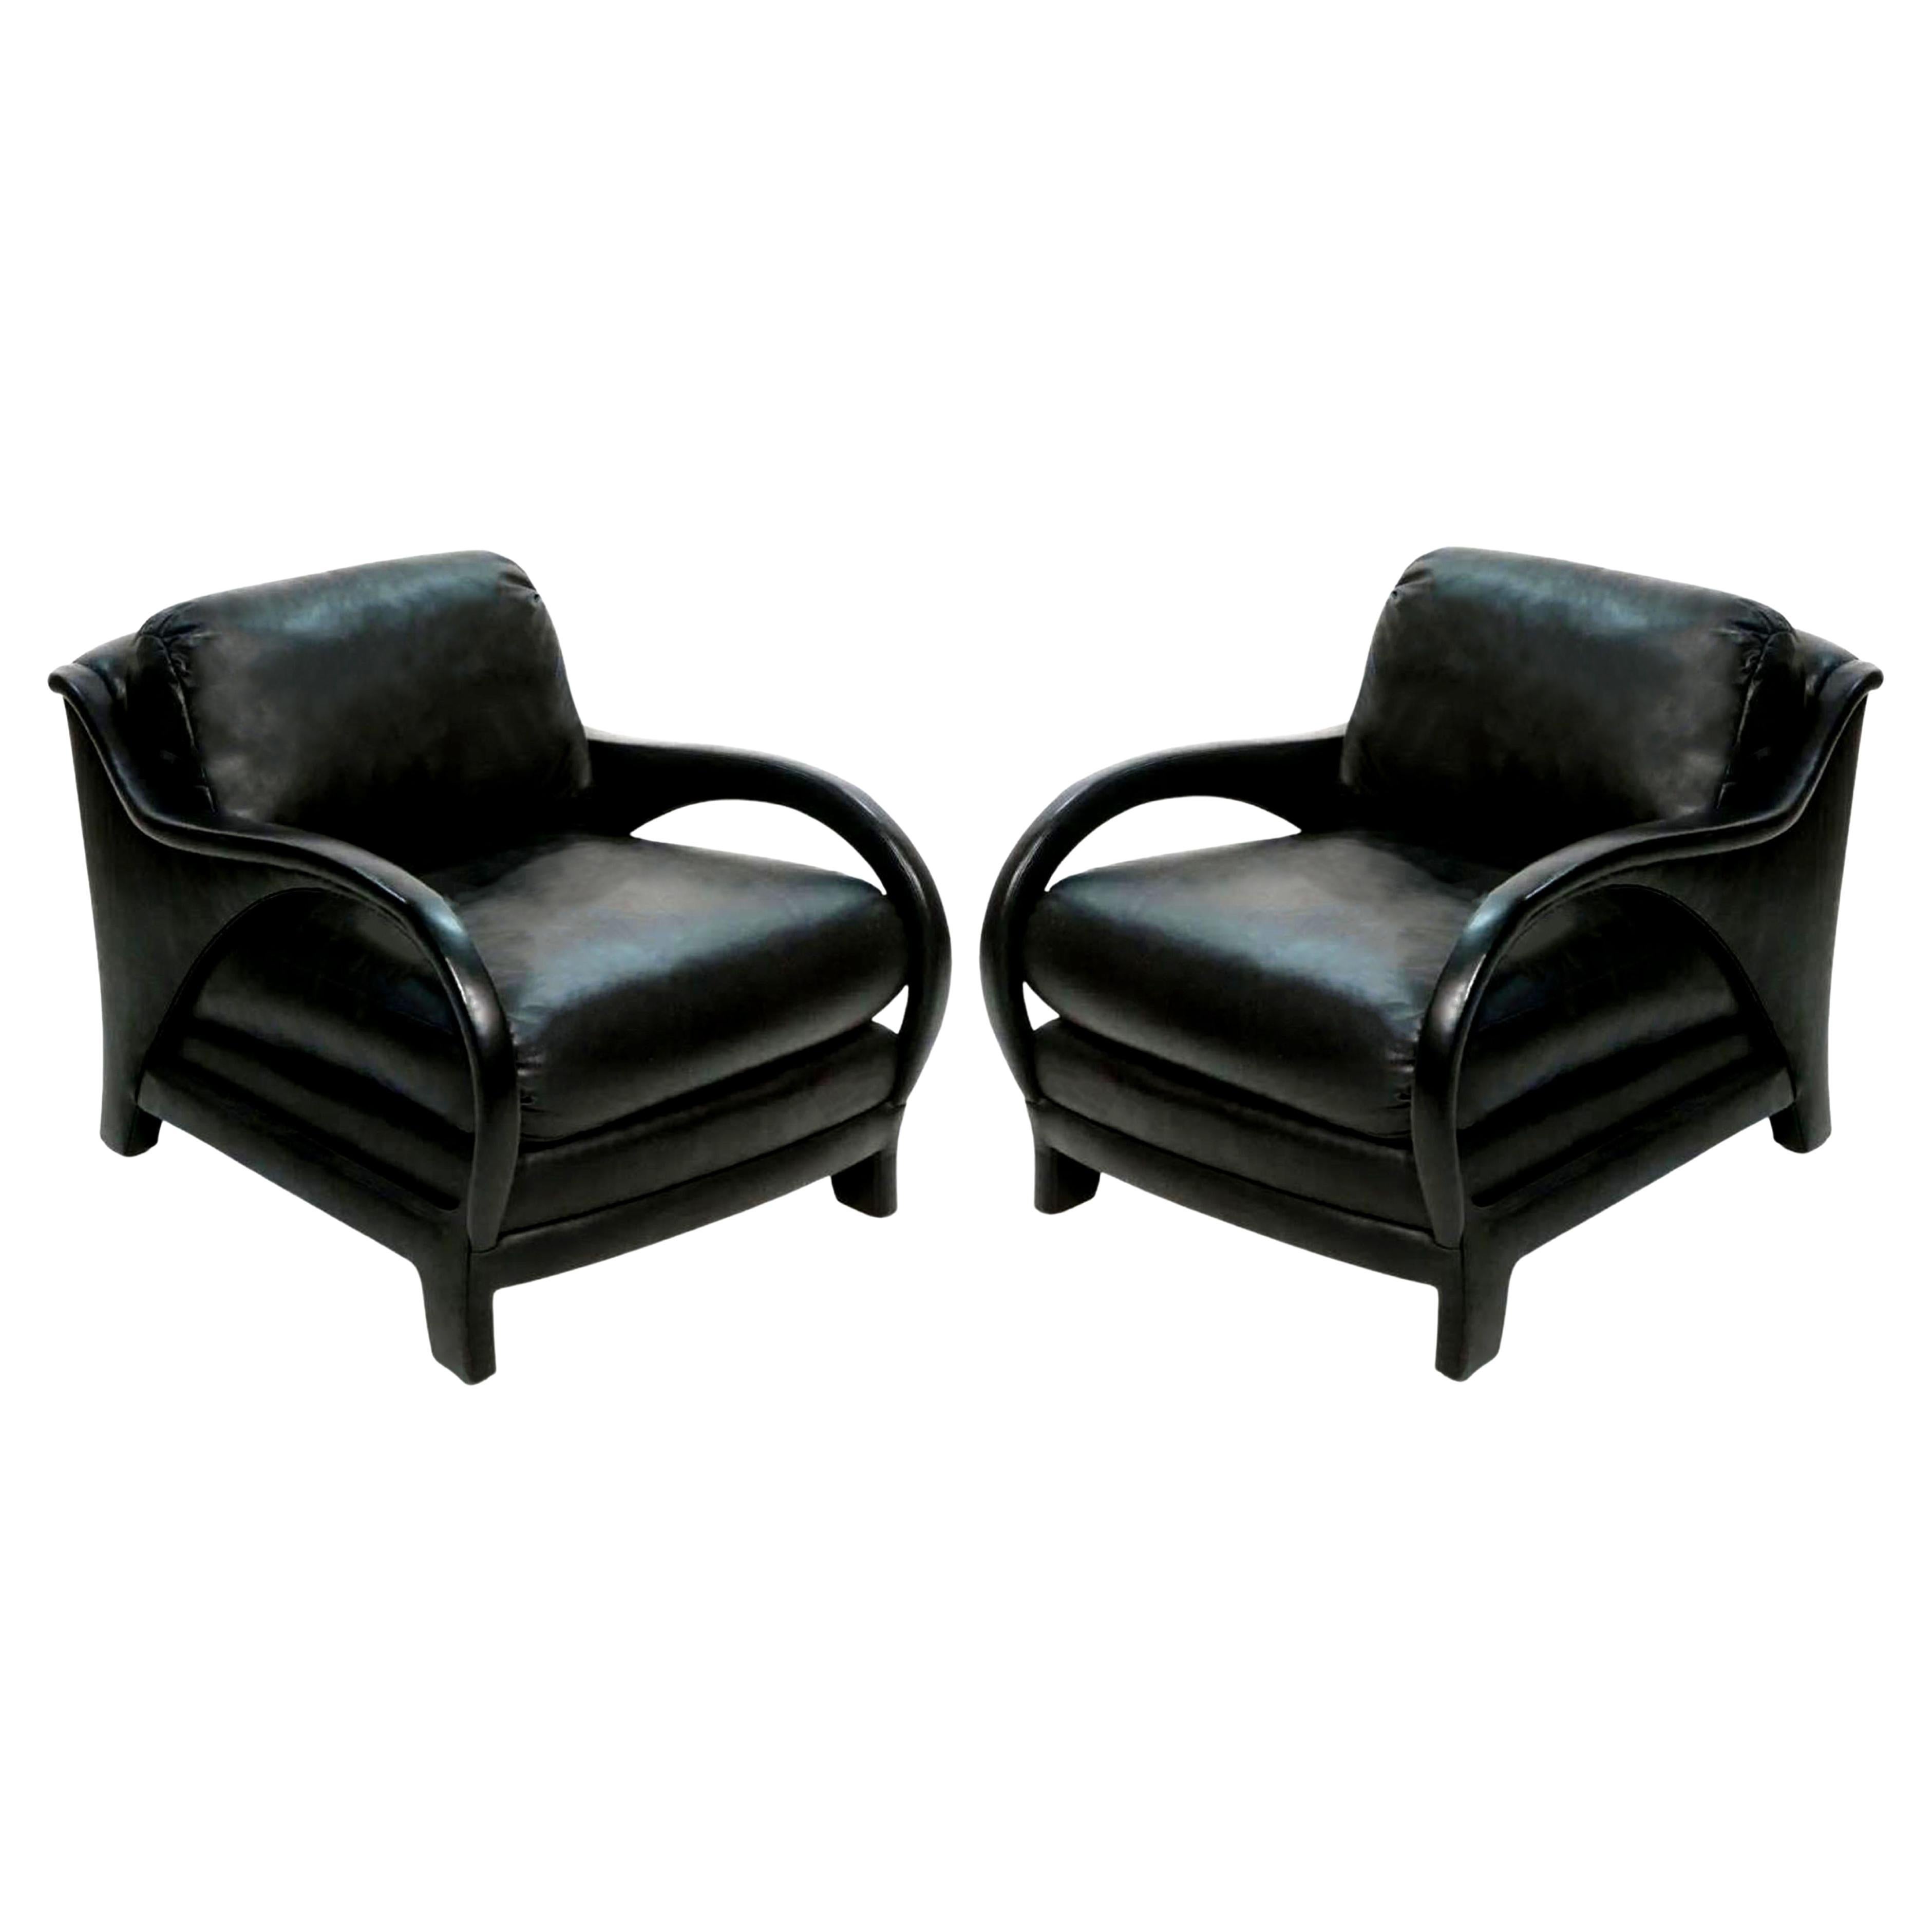 Pair of Black Leather Jay Spectre Tycoon Lounge Chairs